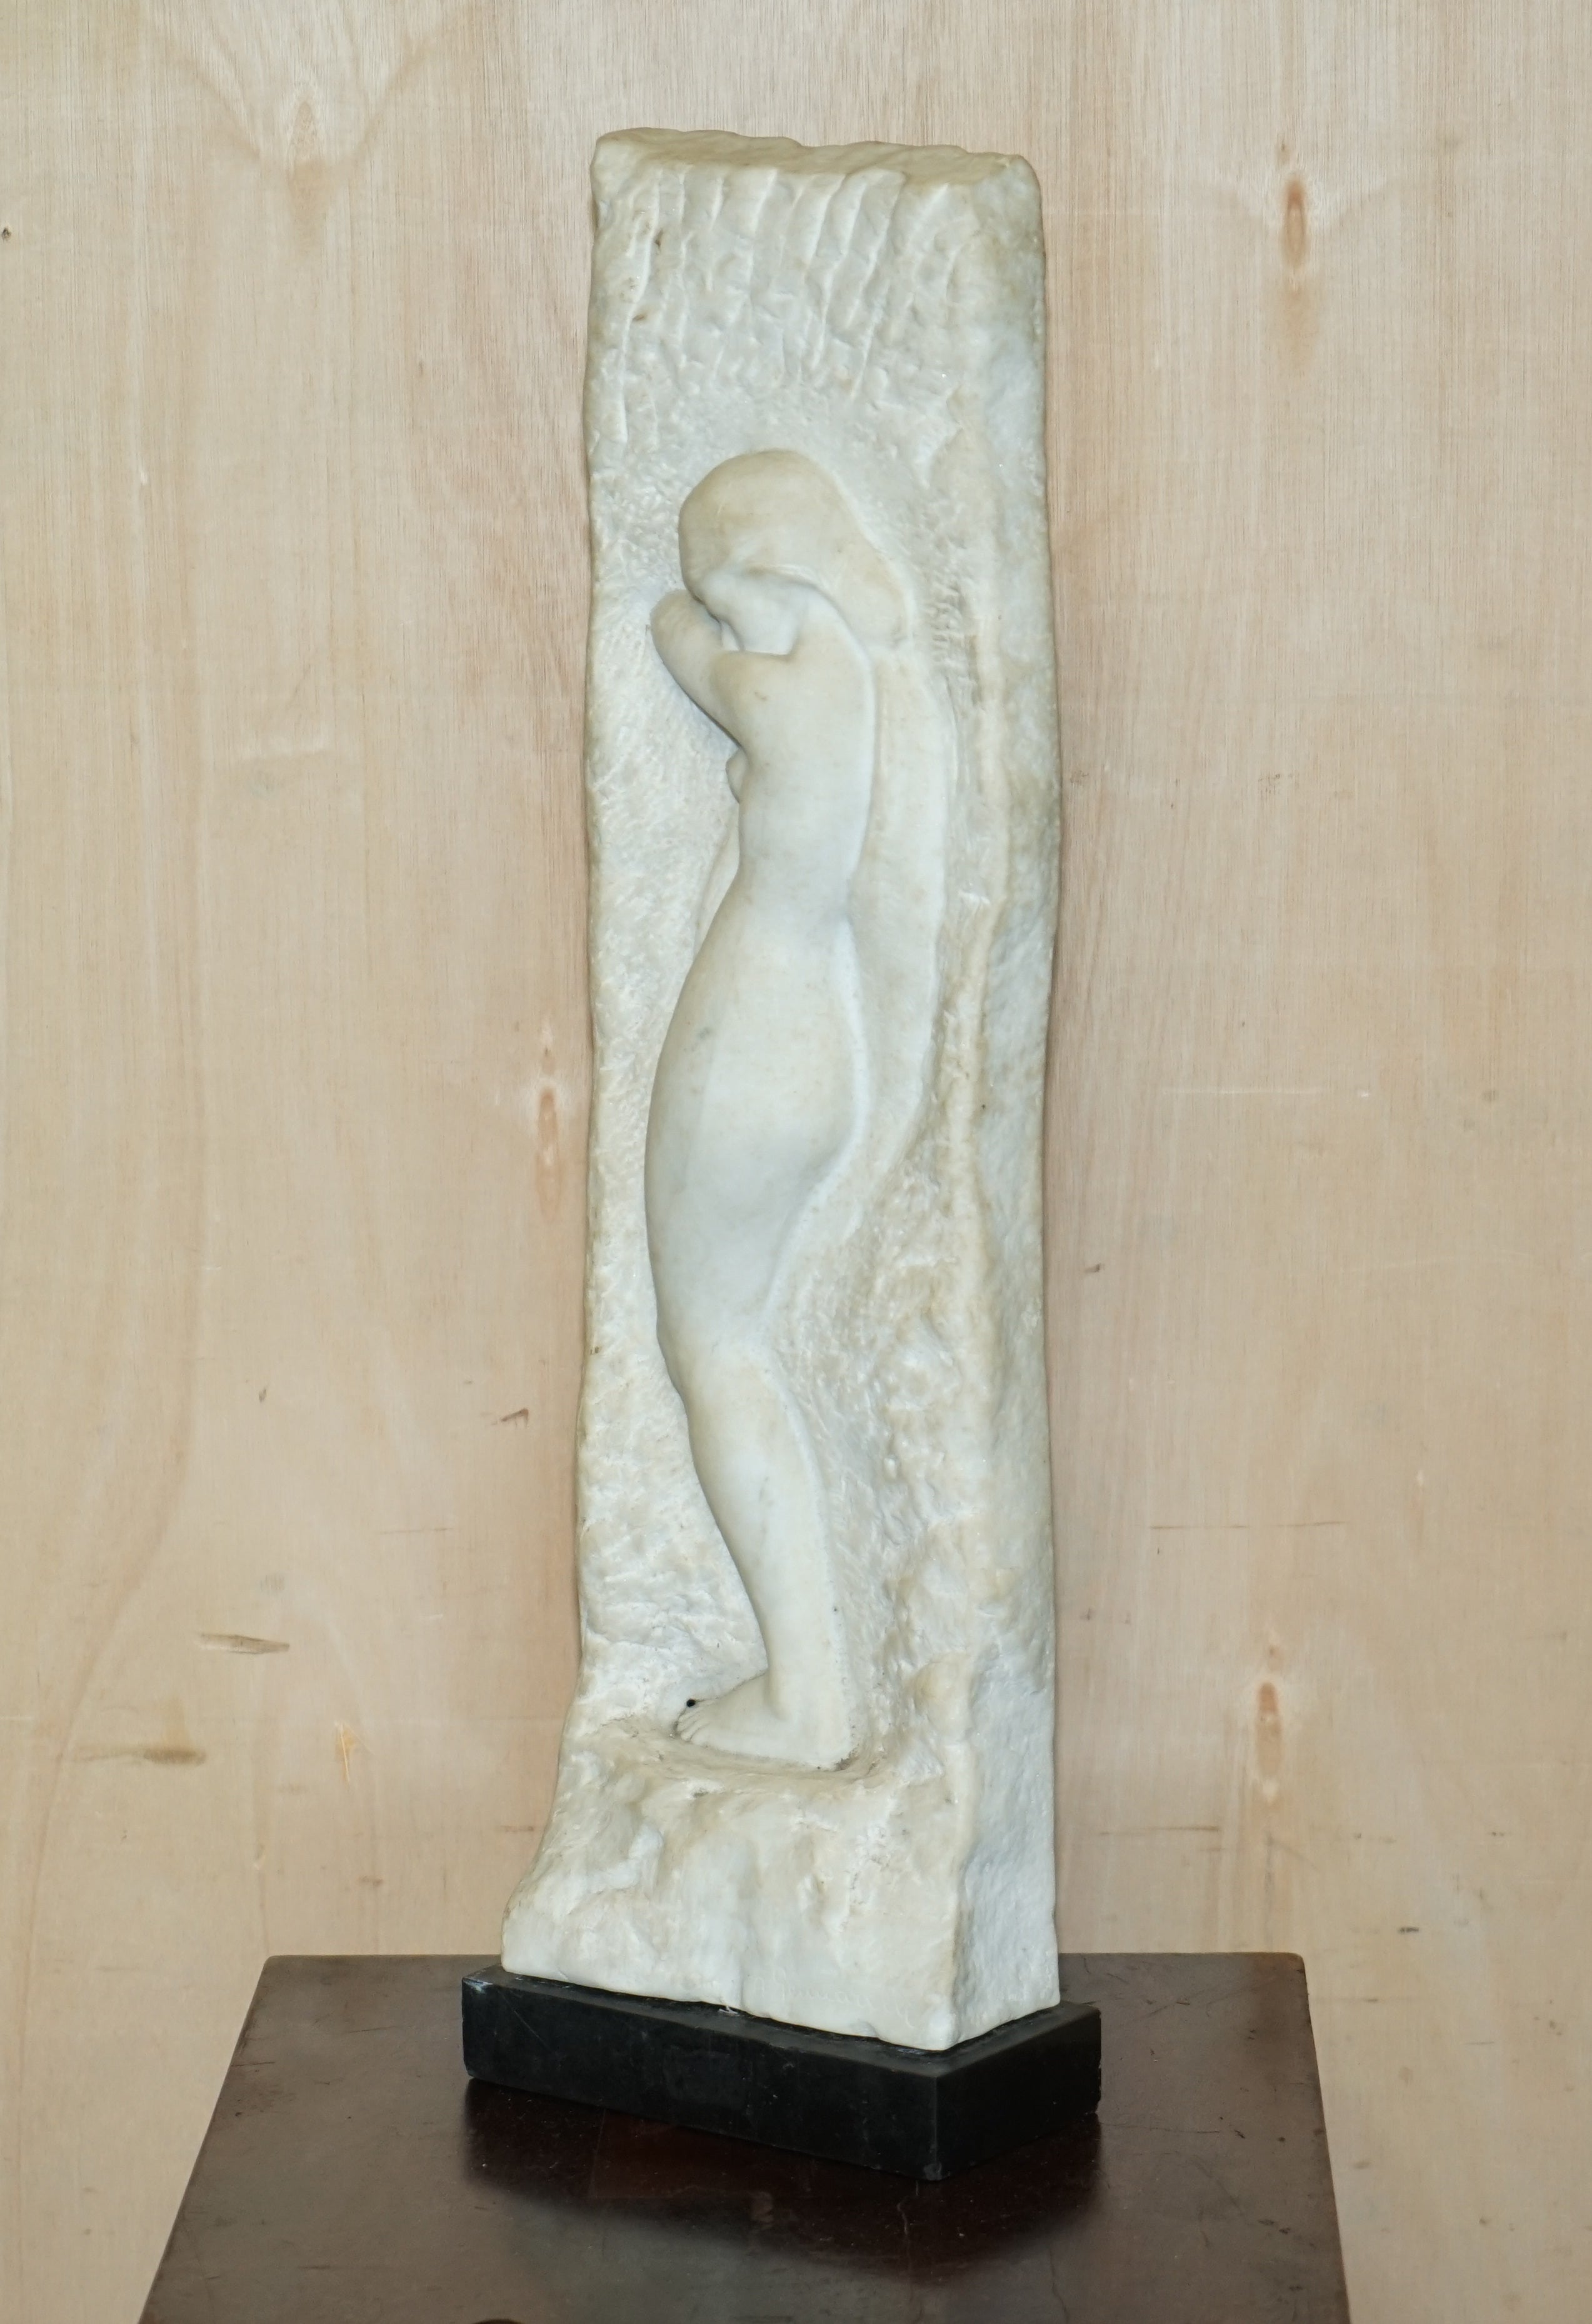 Royal House Antiques

Royal House Antiques is delighted to offer for sale this stunning hand carved Carrara marble, signed Amedeo Gennarelli (1881-1943) Italian Art-déco sculpture of a nude lady circa 1920

Please note the delivery fee listed is